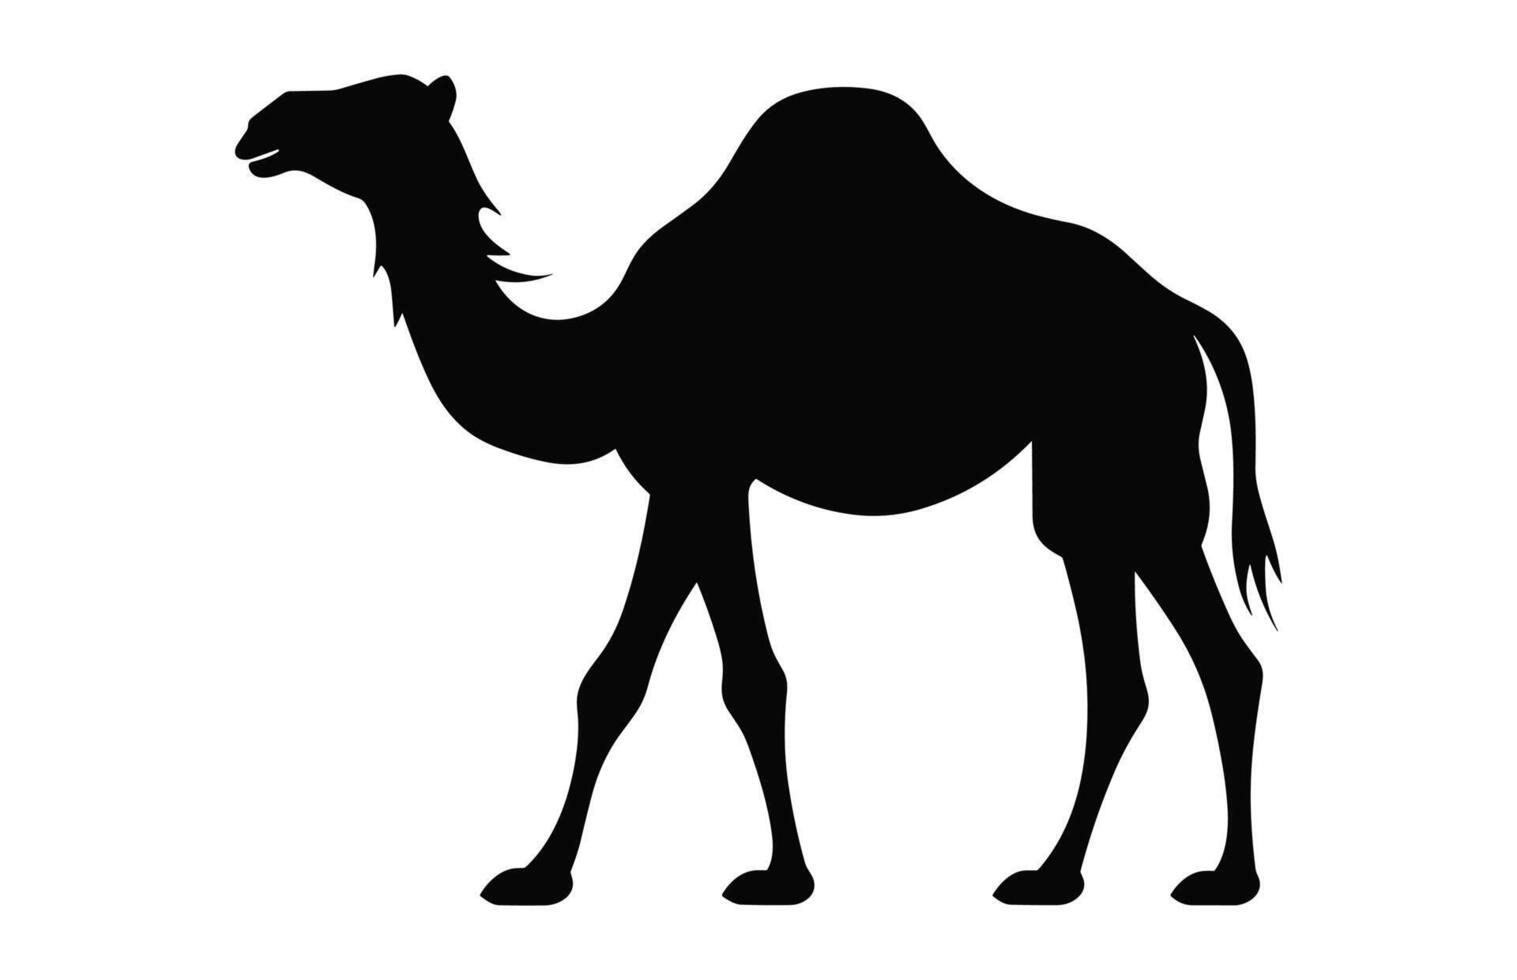 Camel Silhouette black vector isolated on a white background